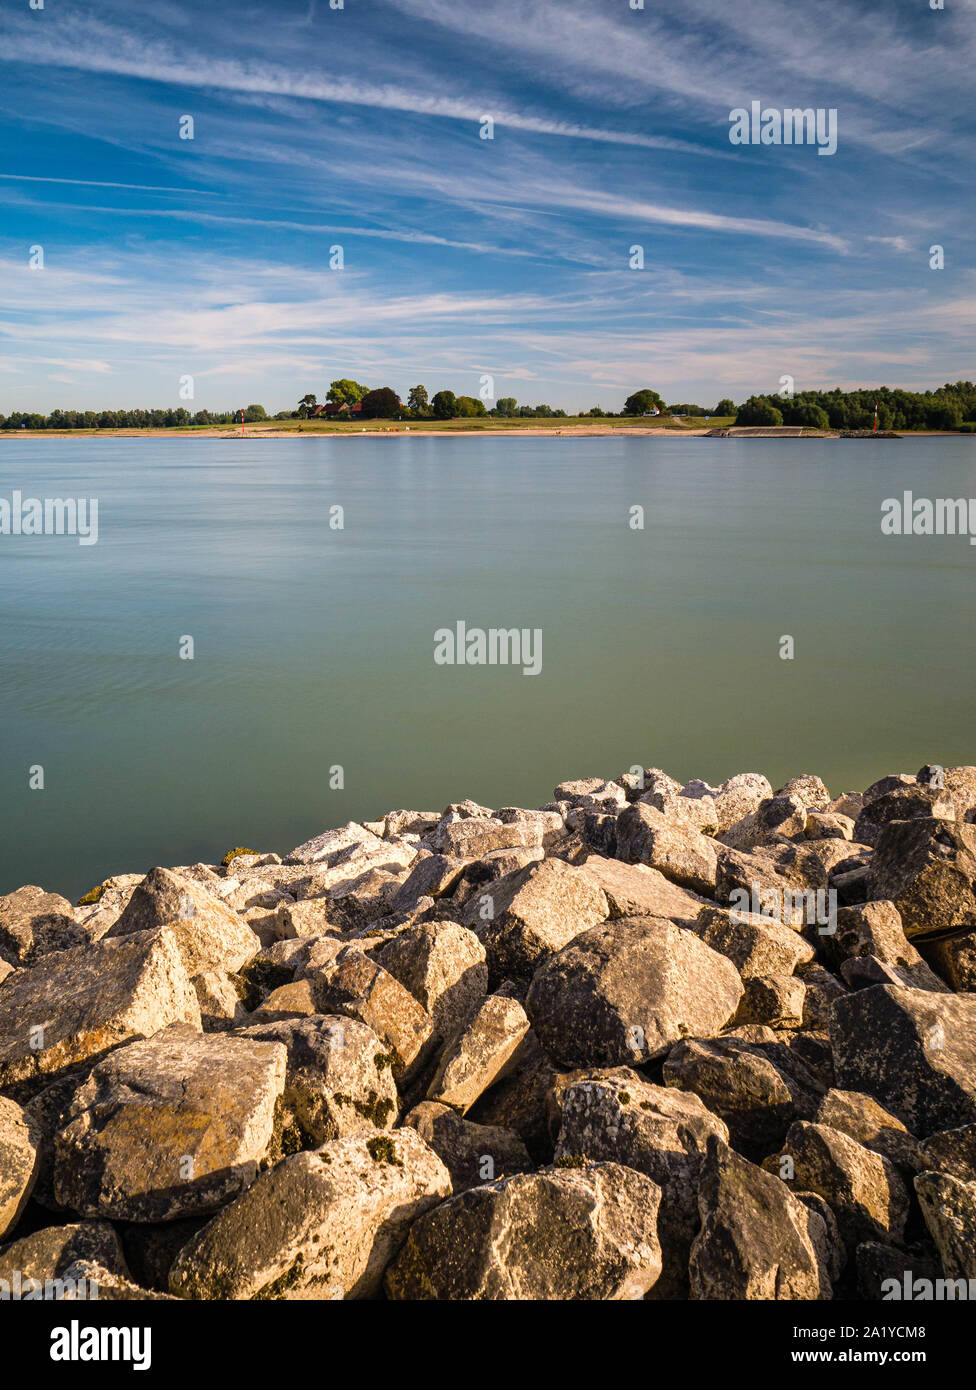 Calm rhine river with rocky bank in the foregound and sandy beach in the distance Stock Photo